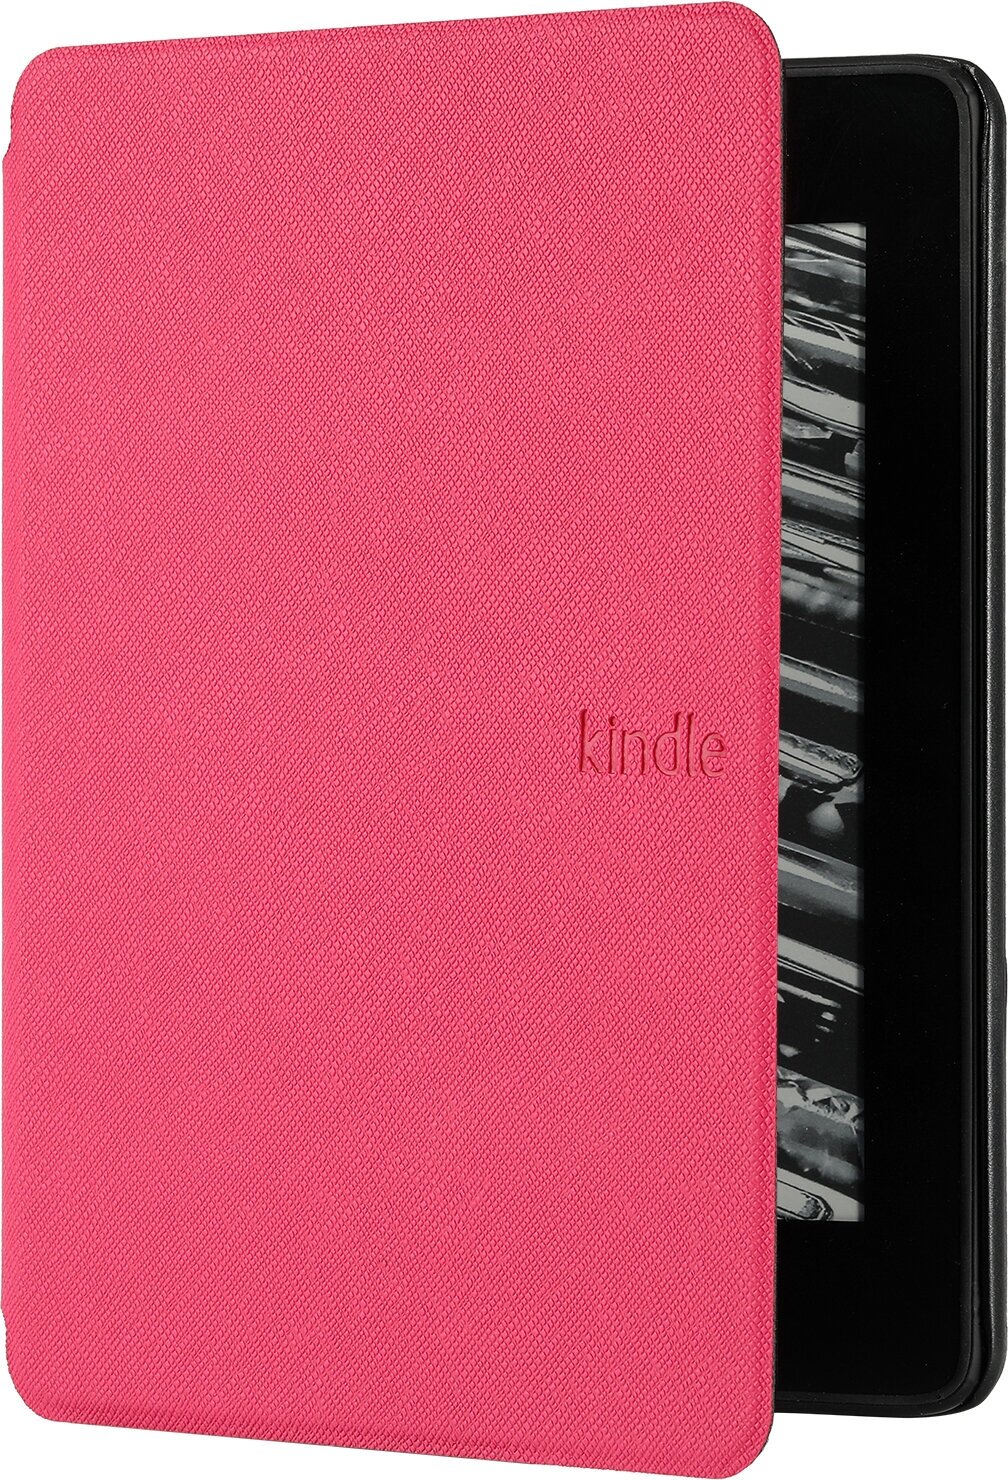 -  Amazon Kindle PaperWhite 5 (6.8", 2021) rose red